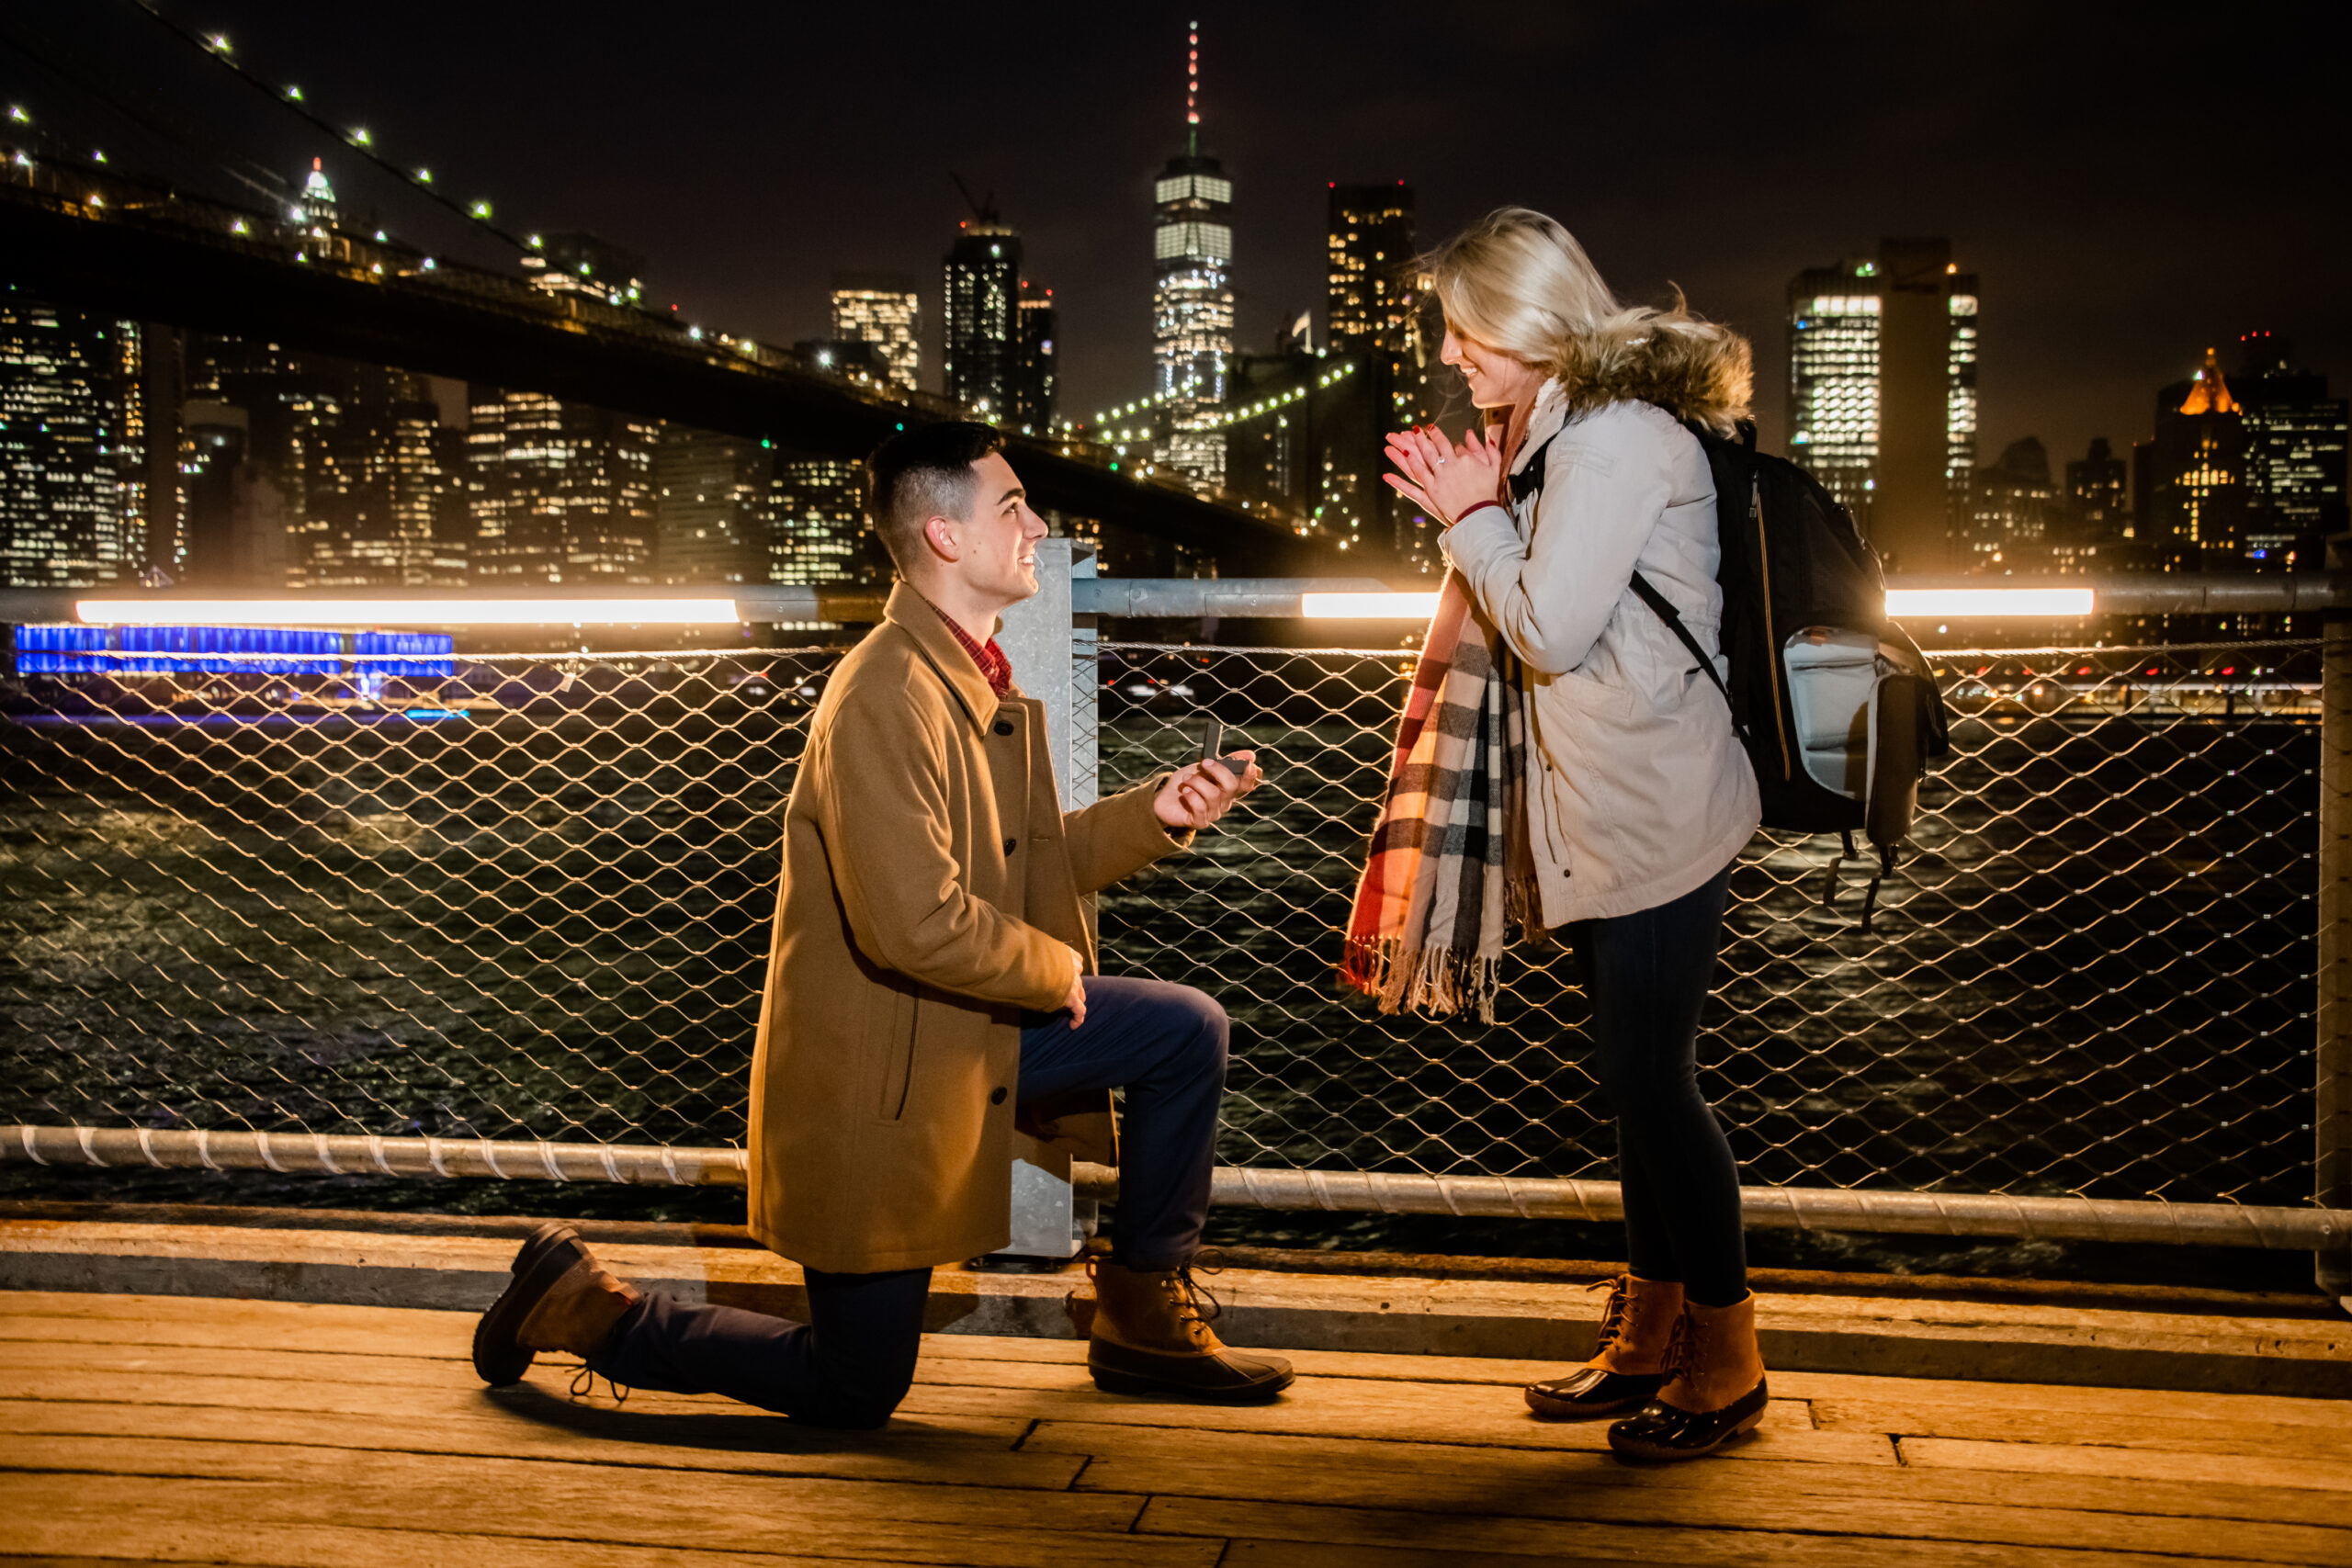 Engagement Photography NYC 2